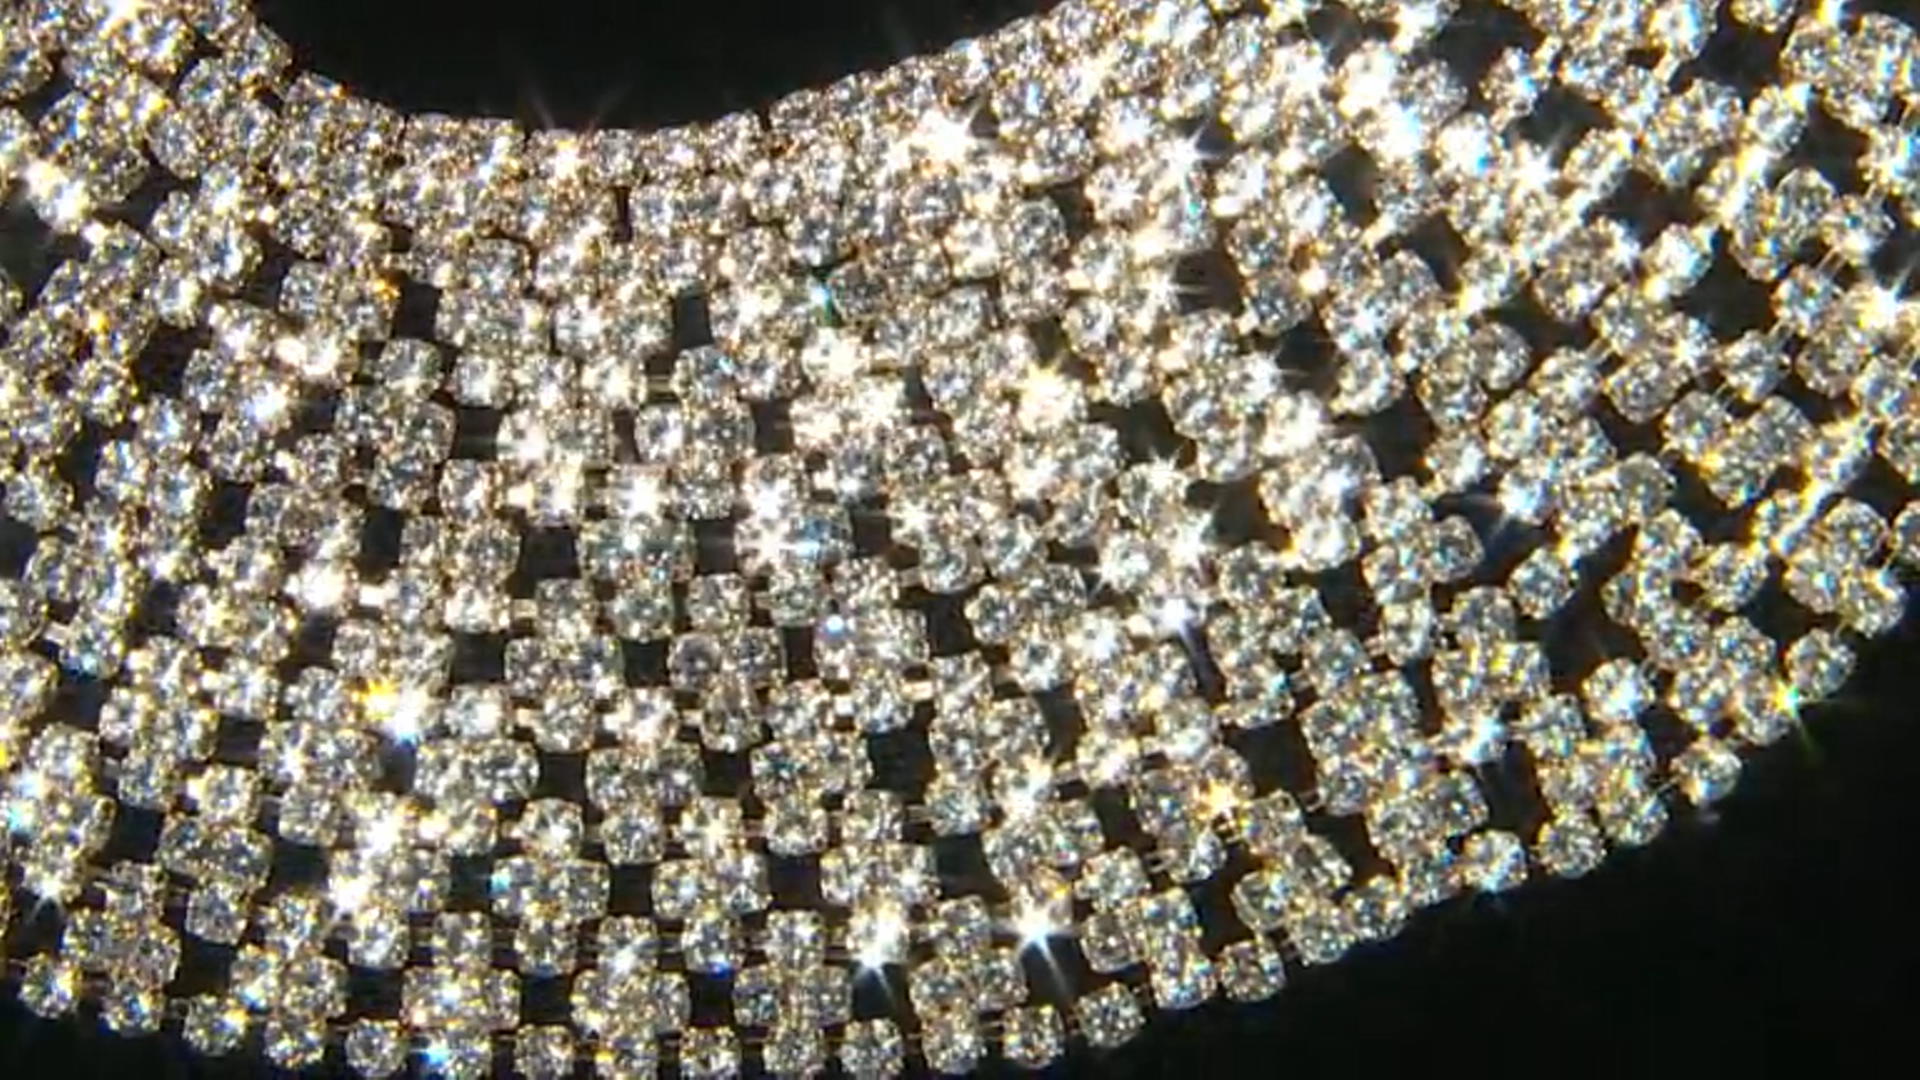 White Crystal Gold Tone Collar Necklace Video Thumbnail